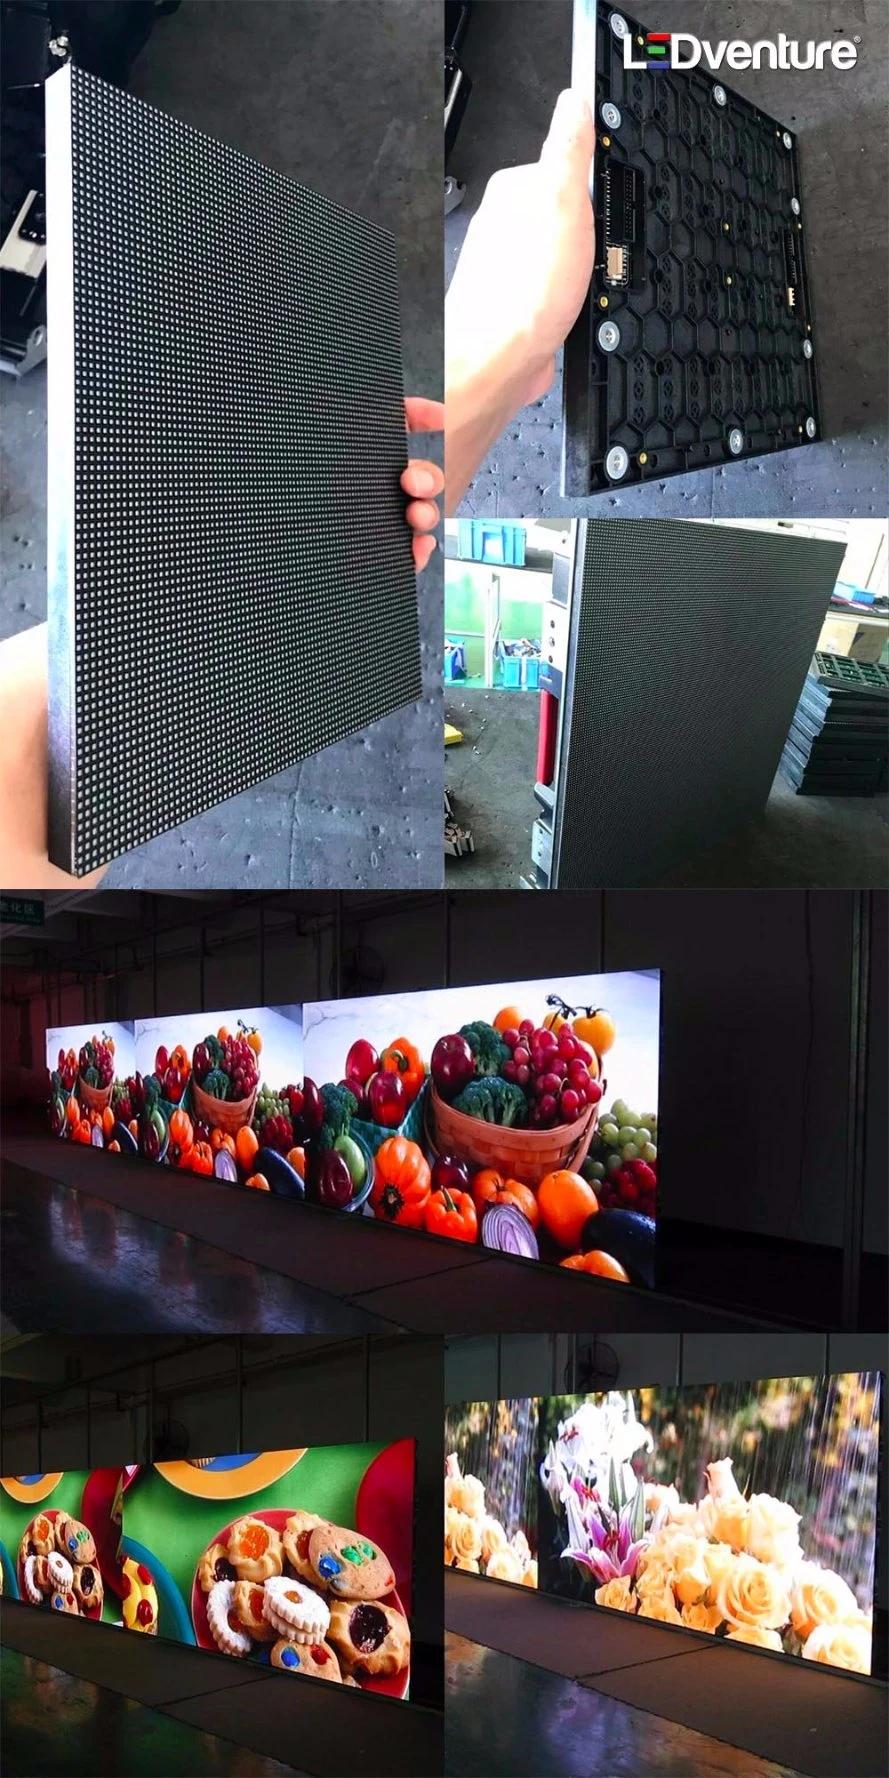 Full Color Indoor P4.81 LED Rental Display Screen for Stage Performance